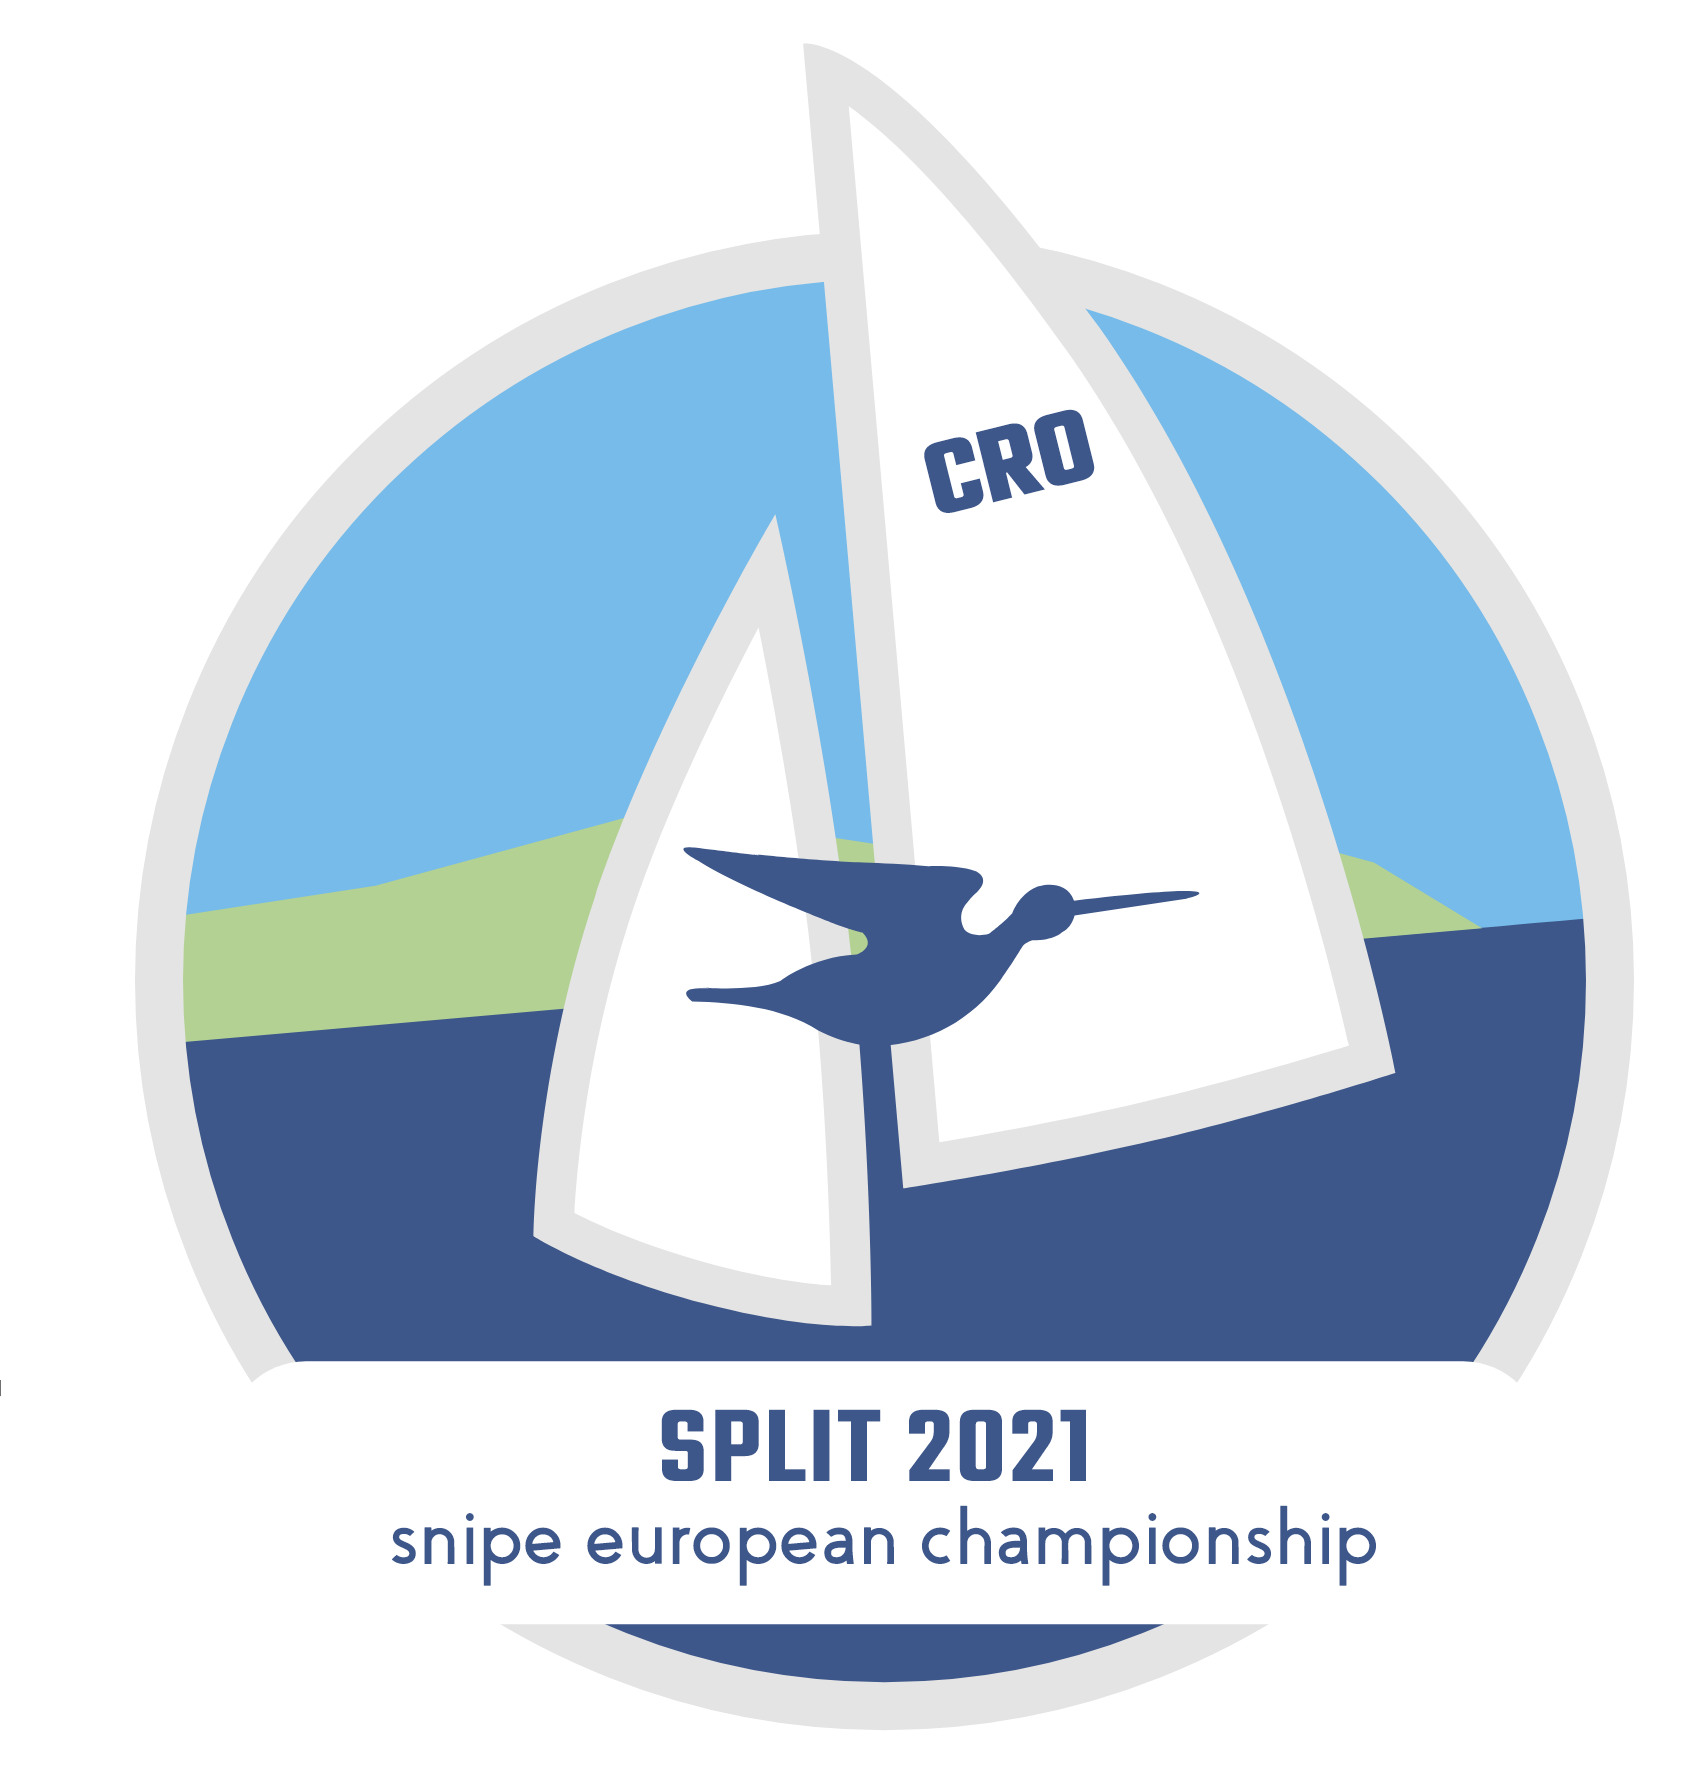 Who is coming to sail the Snipe European Championship? Image